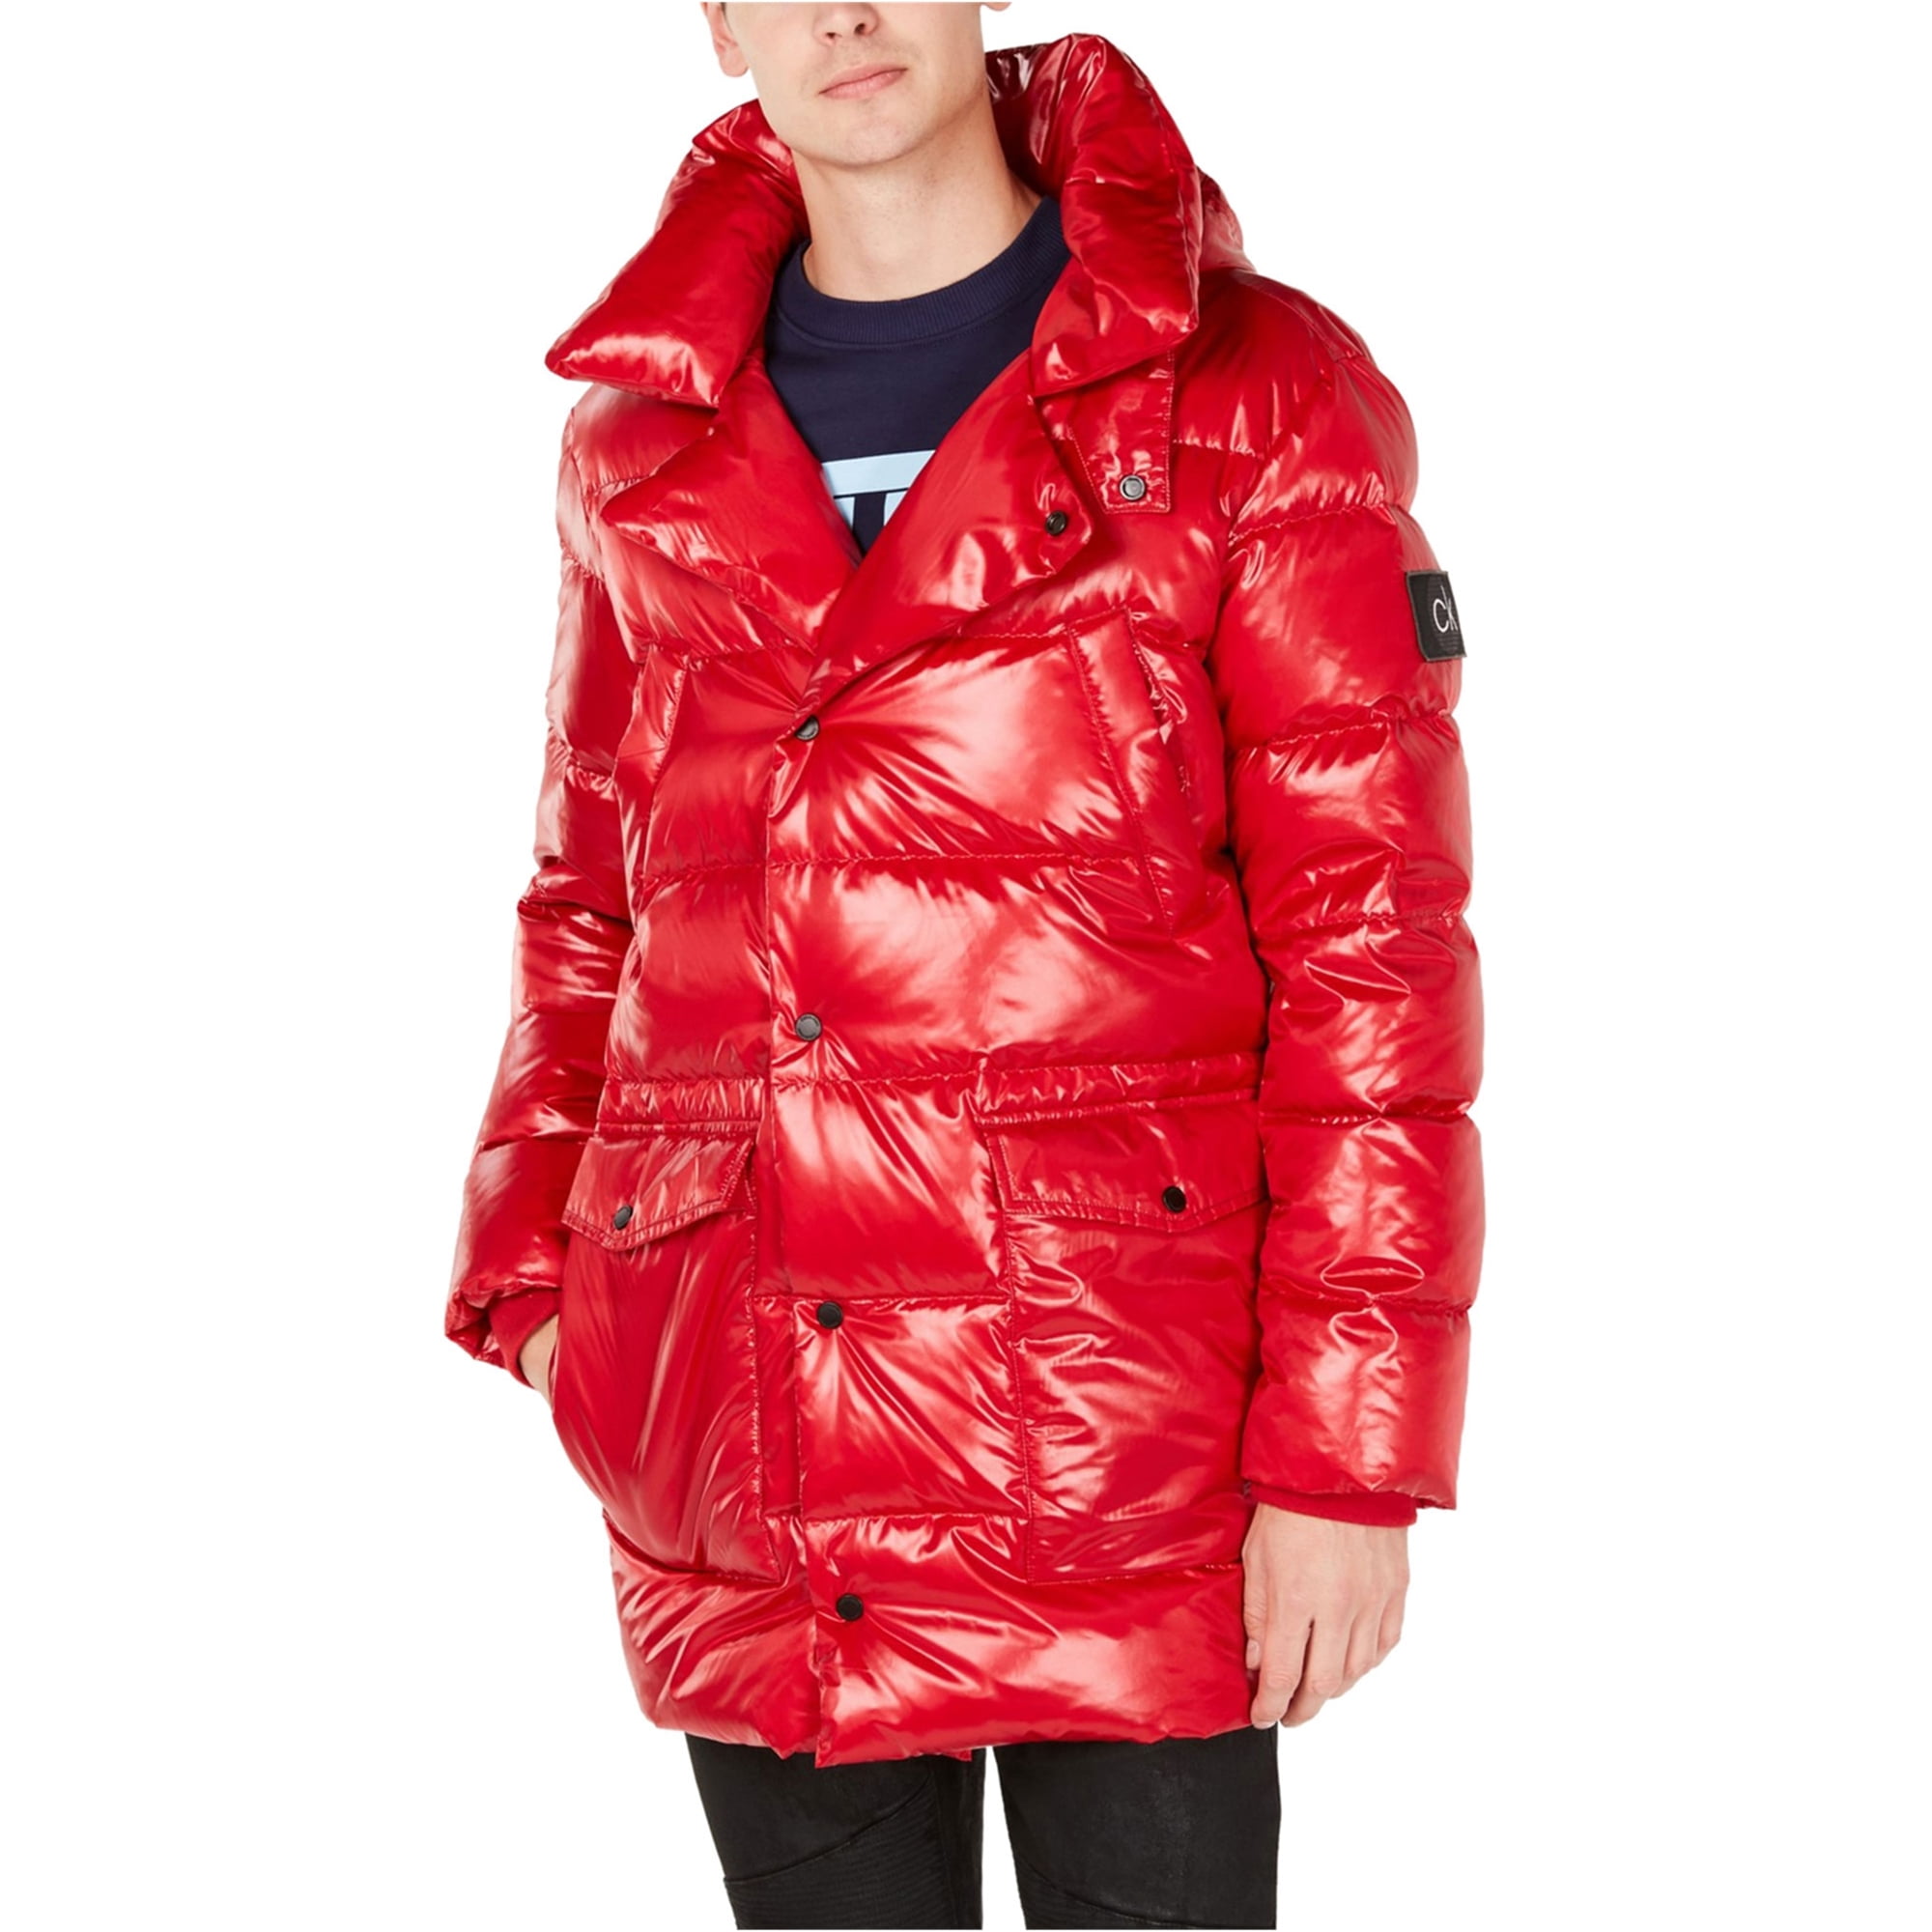 Calvin Klein Mens Oversized Puffer Jacket, Red, X-Small 